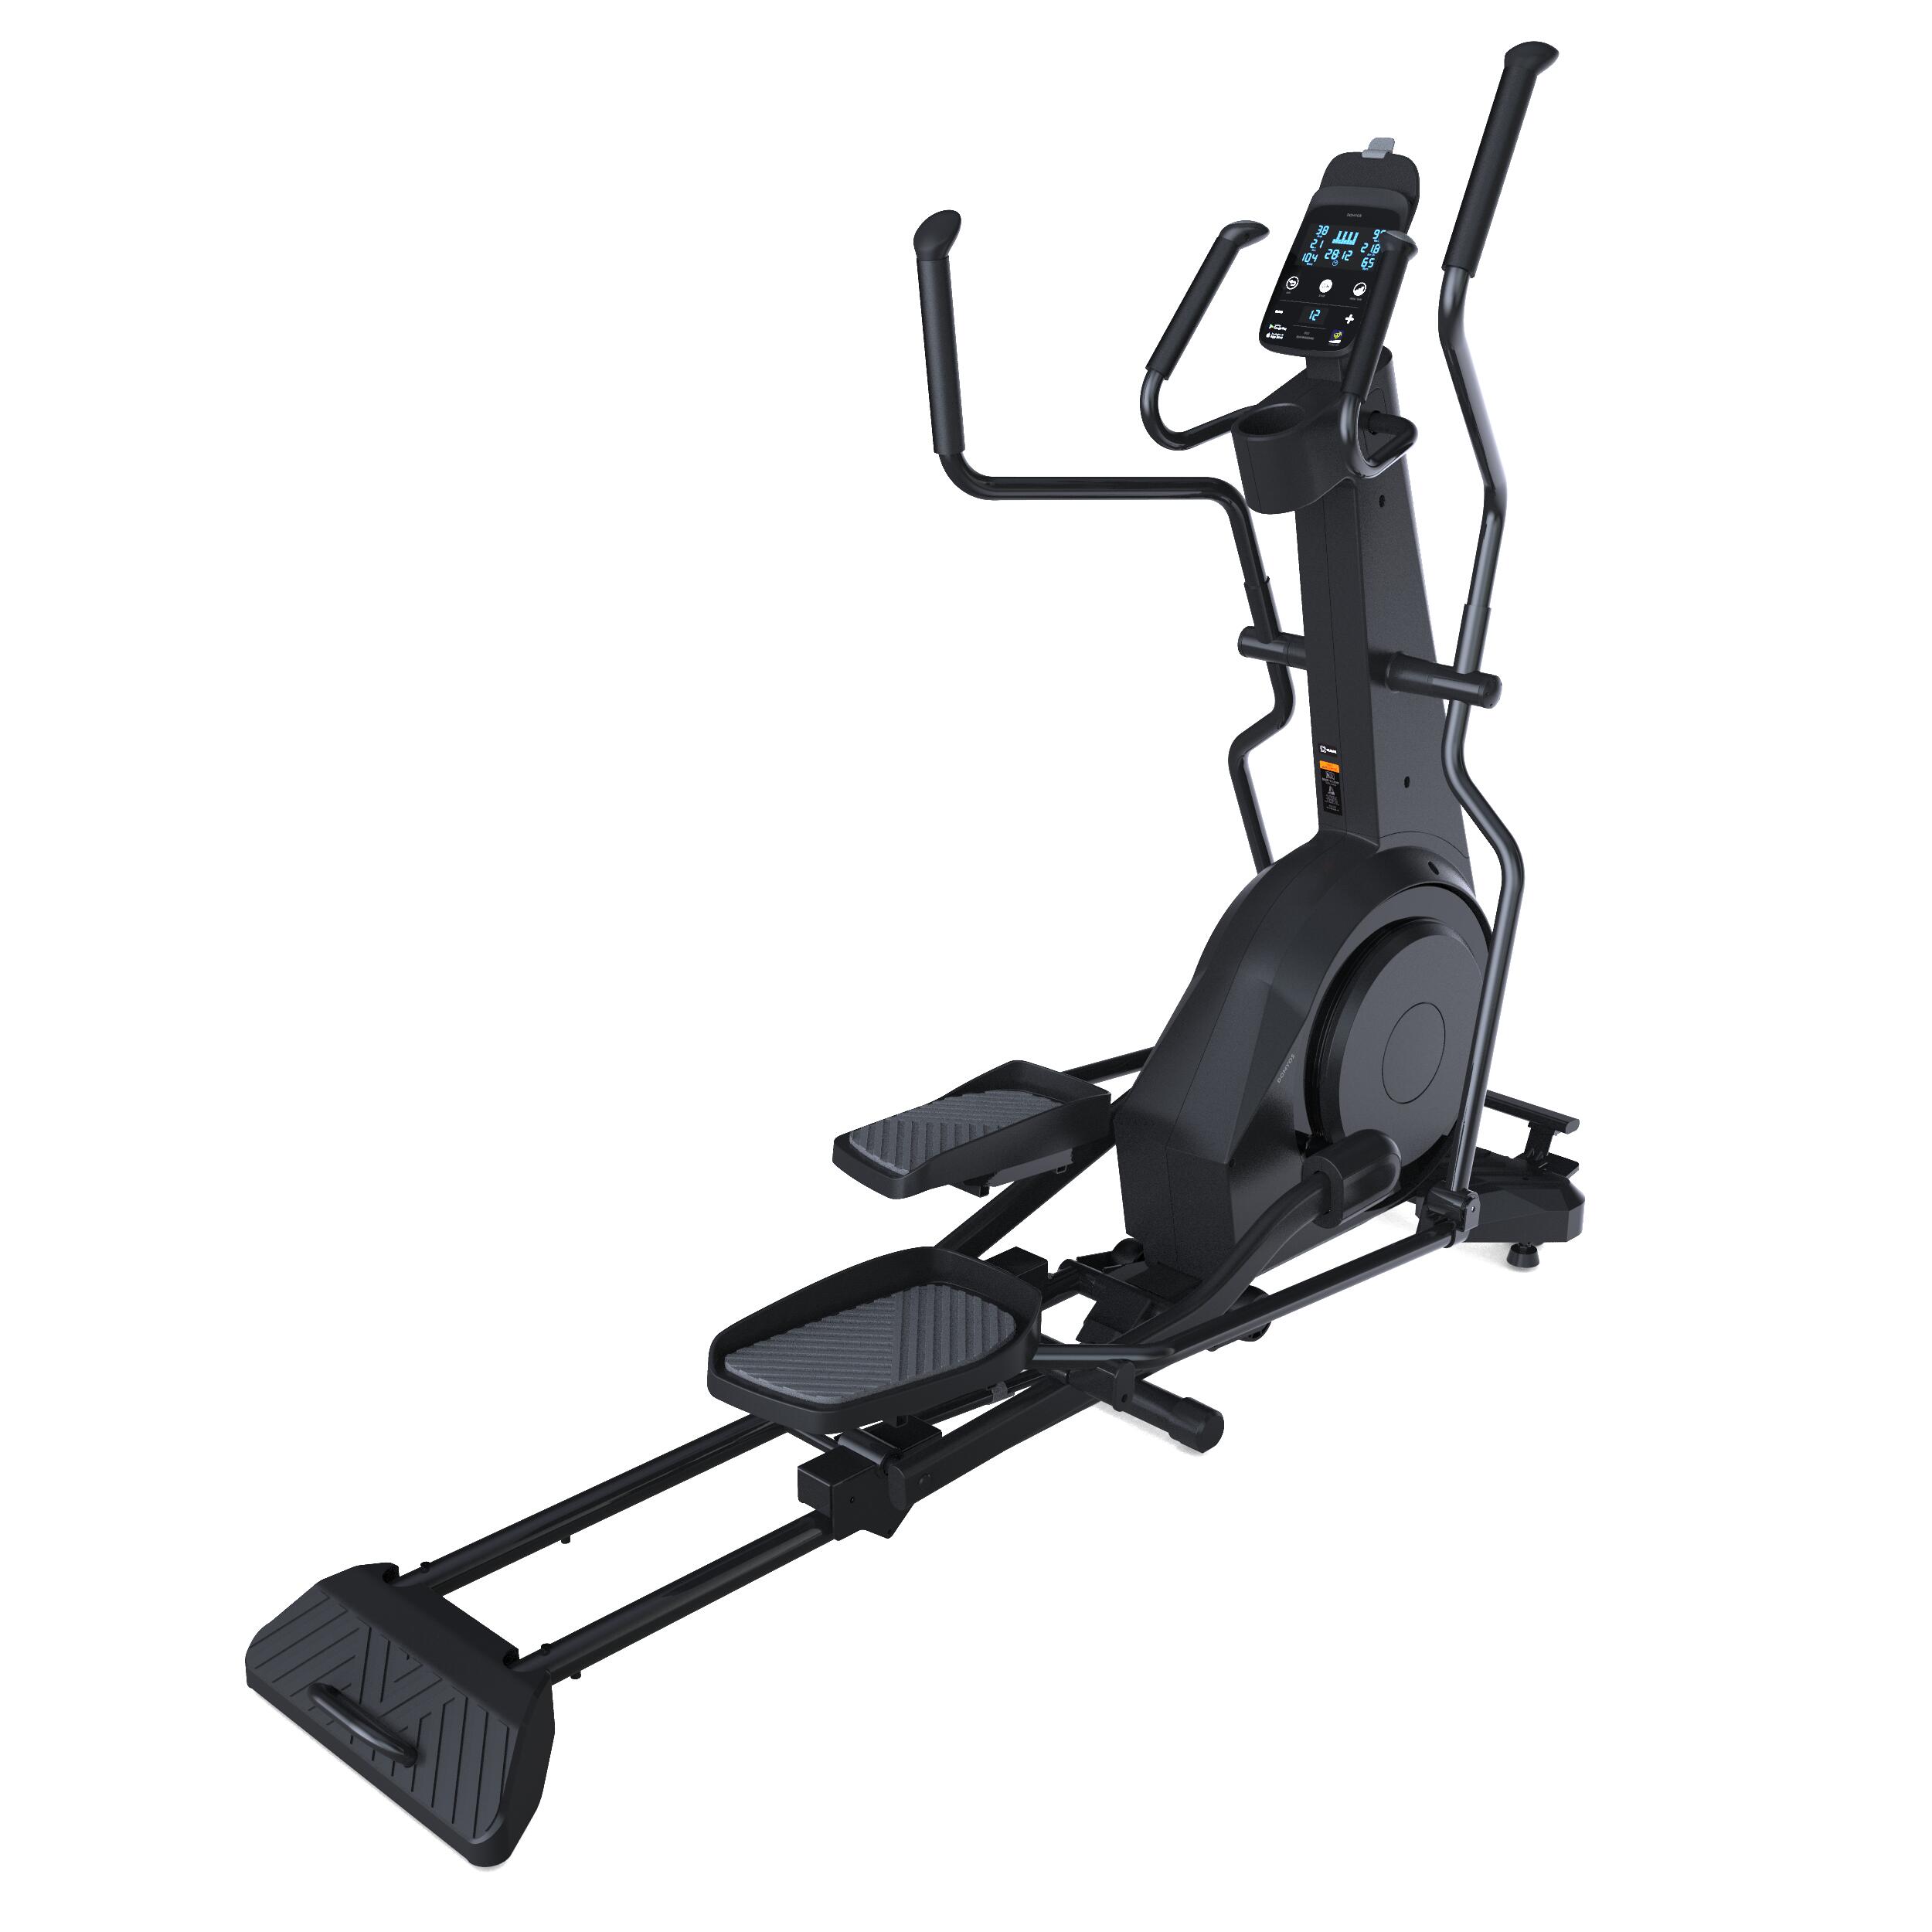 DOMYOS Front Wheel Folding Connected Self-Powered Cross Trainer Challenge Elliptical